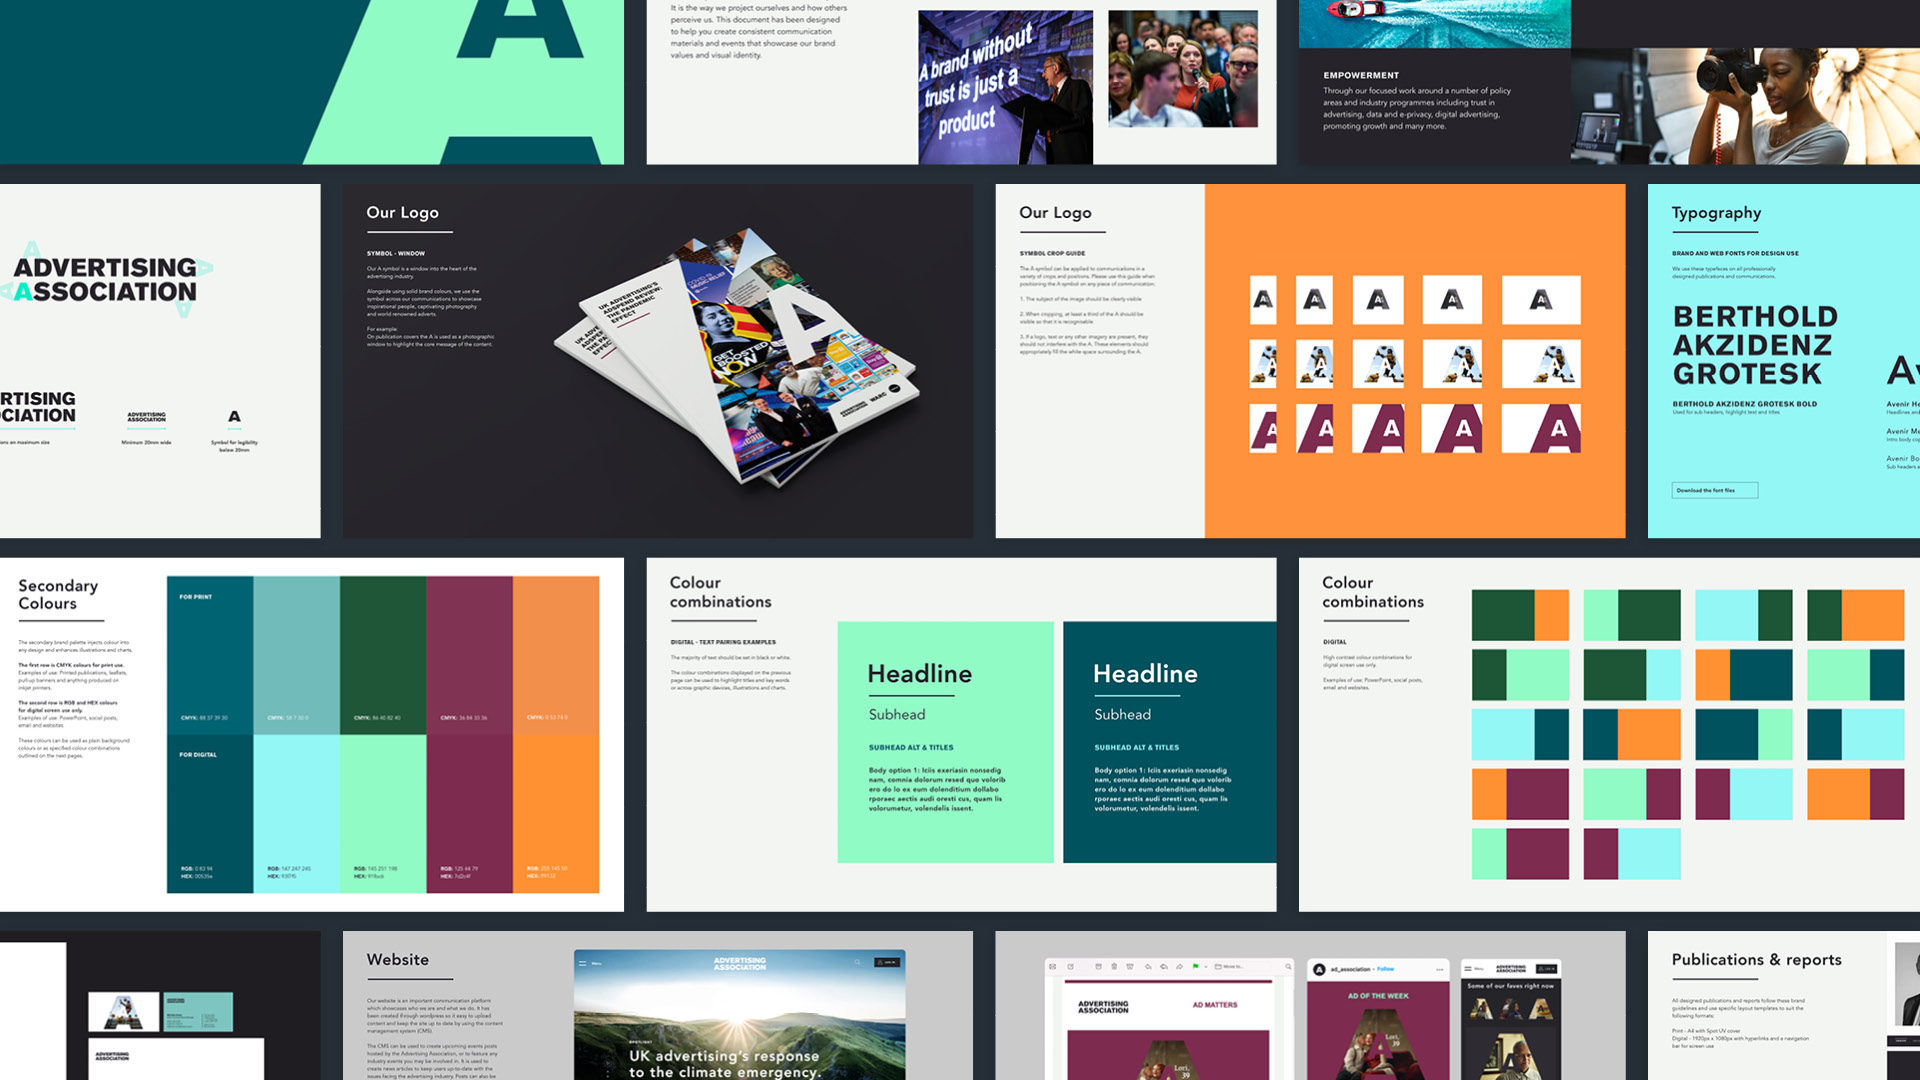 Brand guidelines layout